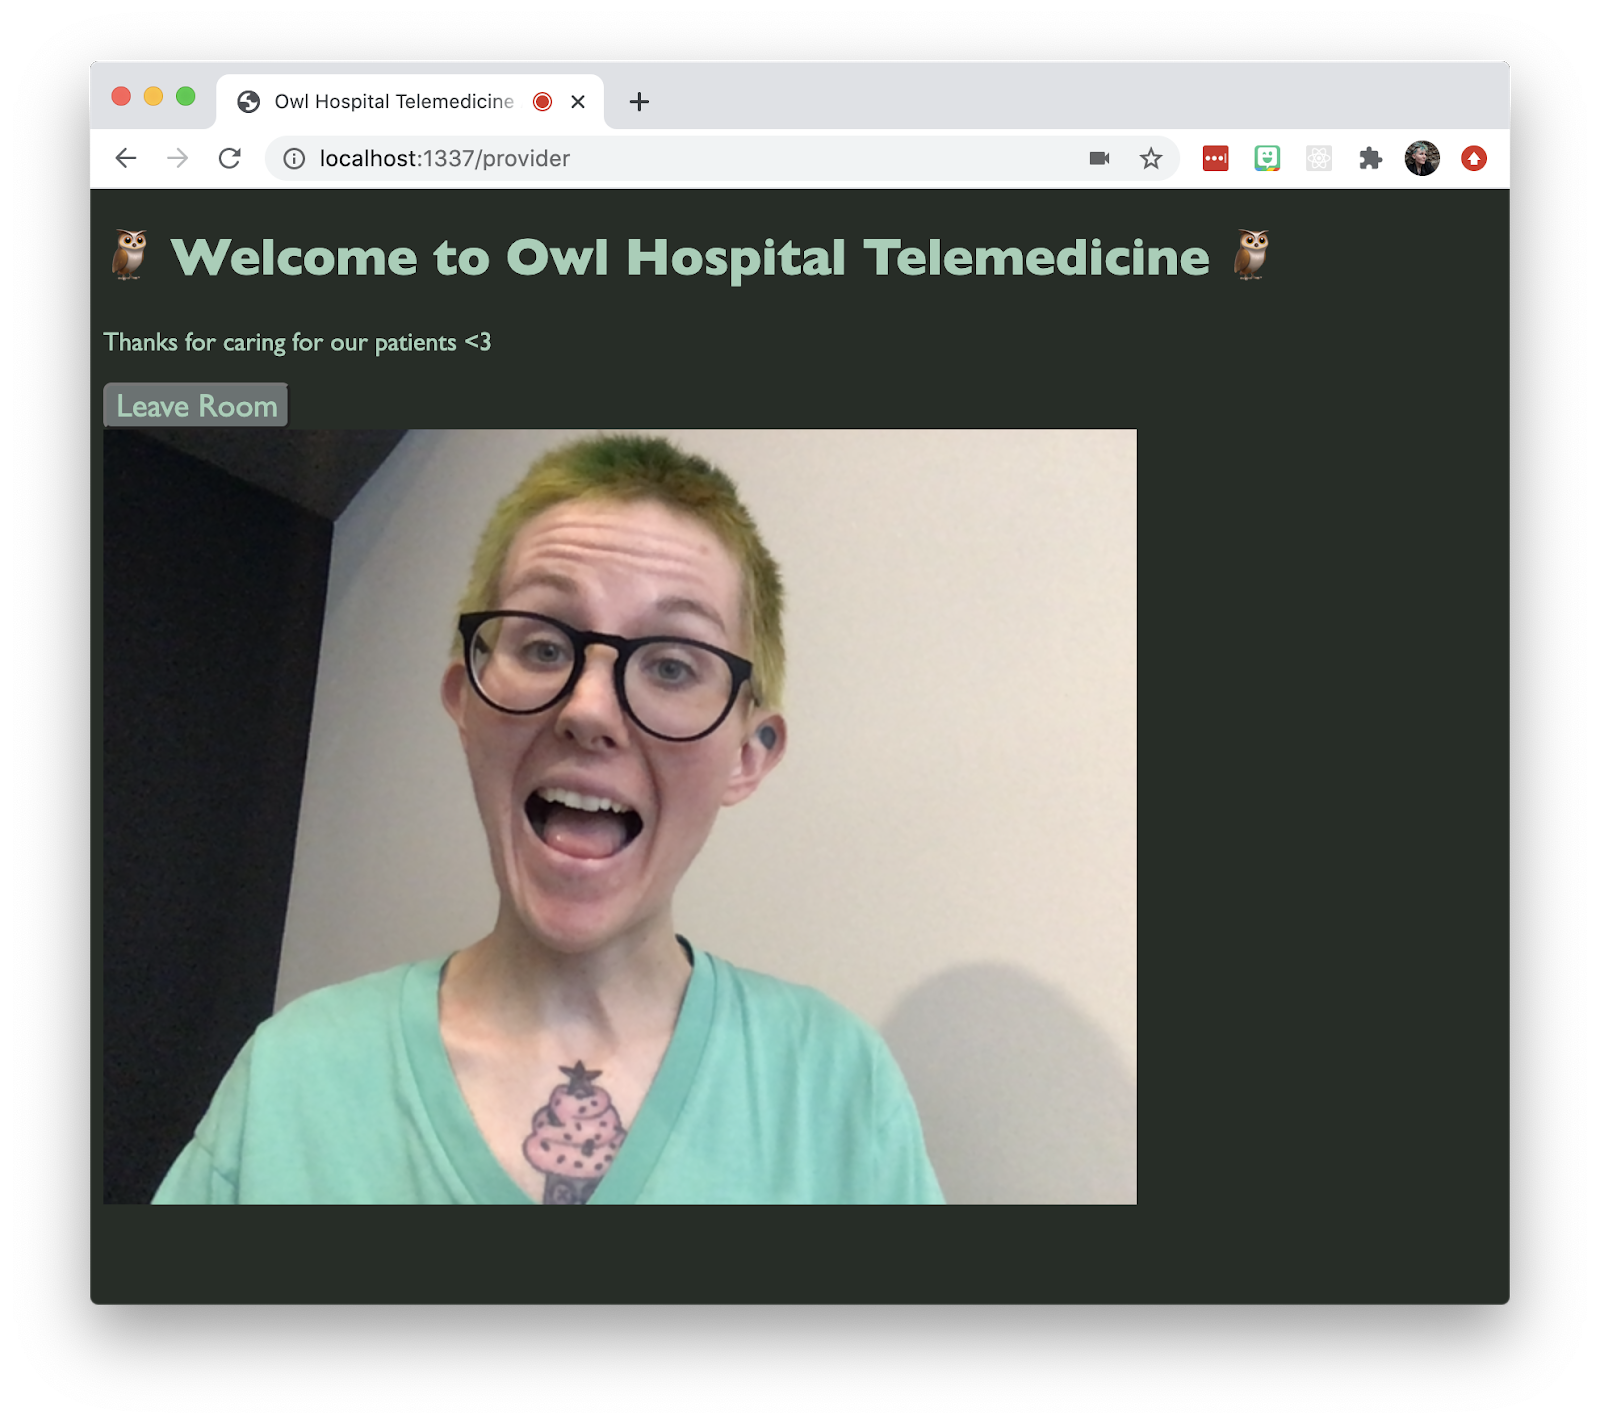 Screenshot of a Twilio Video app that says "Welcome to Owl Hospital Telemedicine." Small text says "Thanks for caring for our patients." There&#x27;s a button that says "Leave Room" and a non-binary person in the video chat, with green hair, making a silly face.